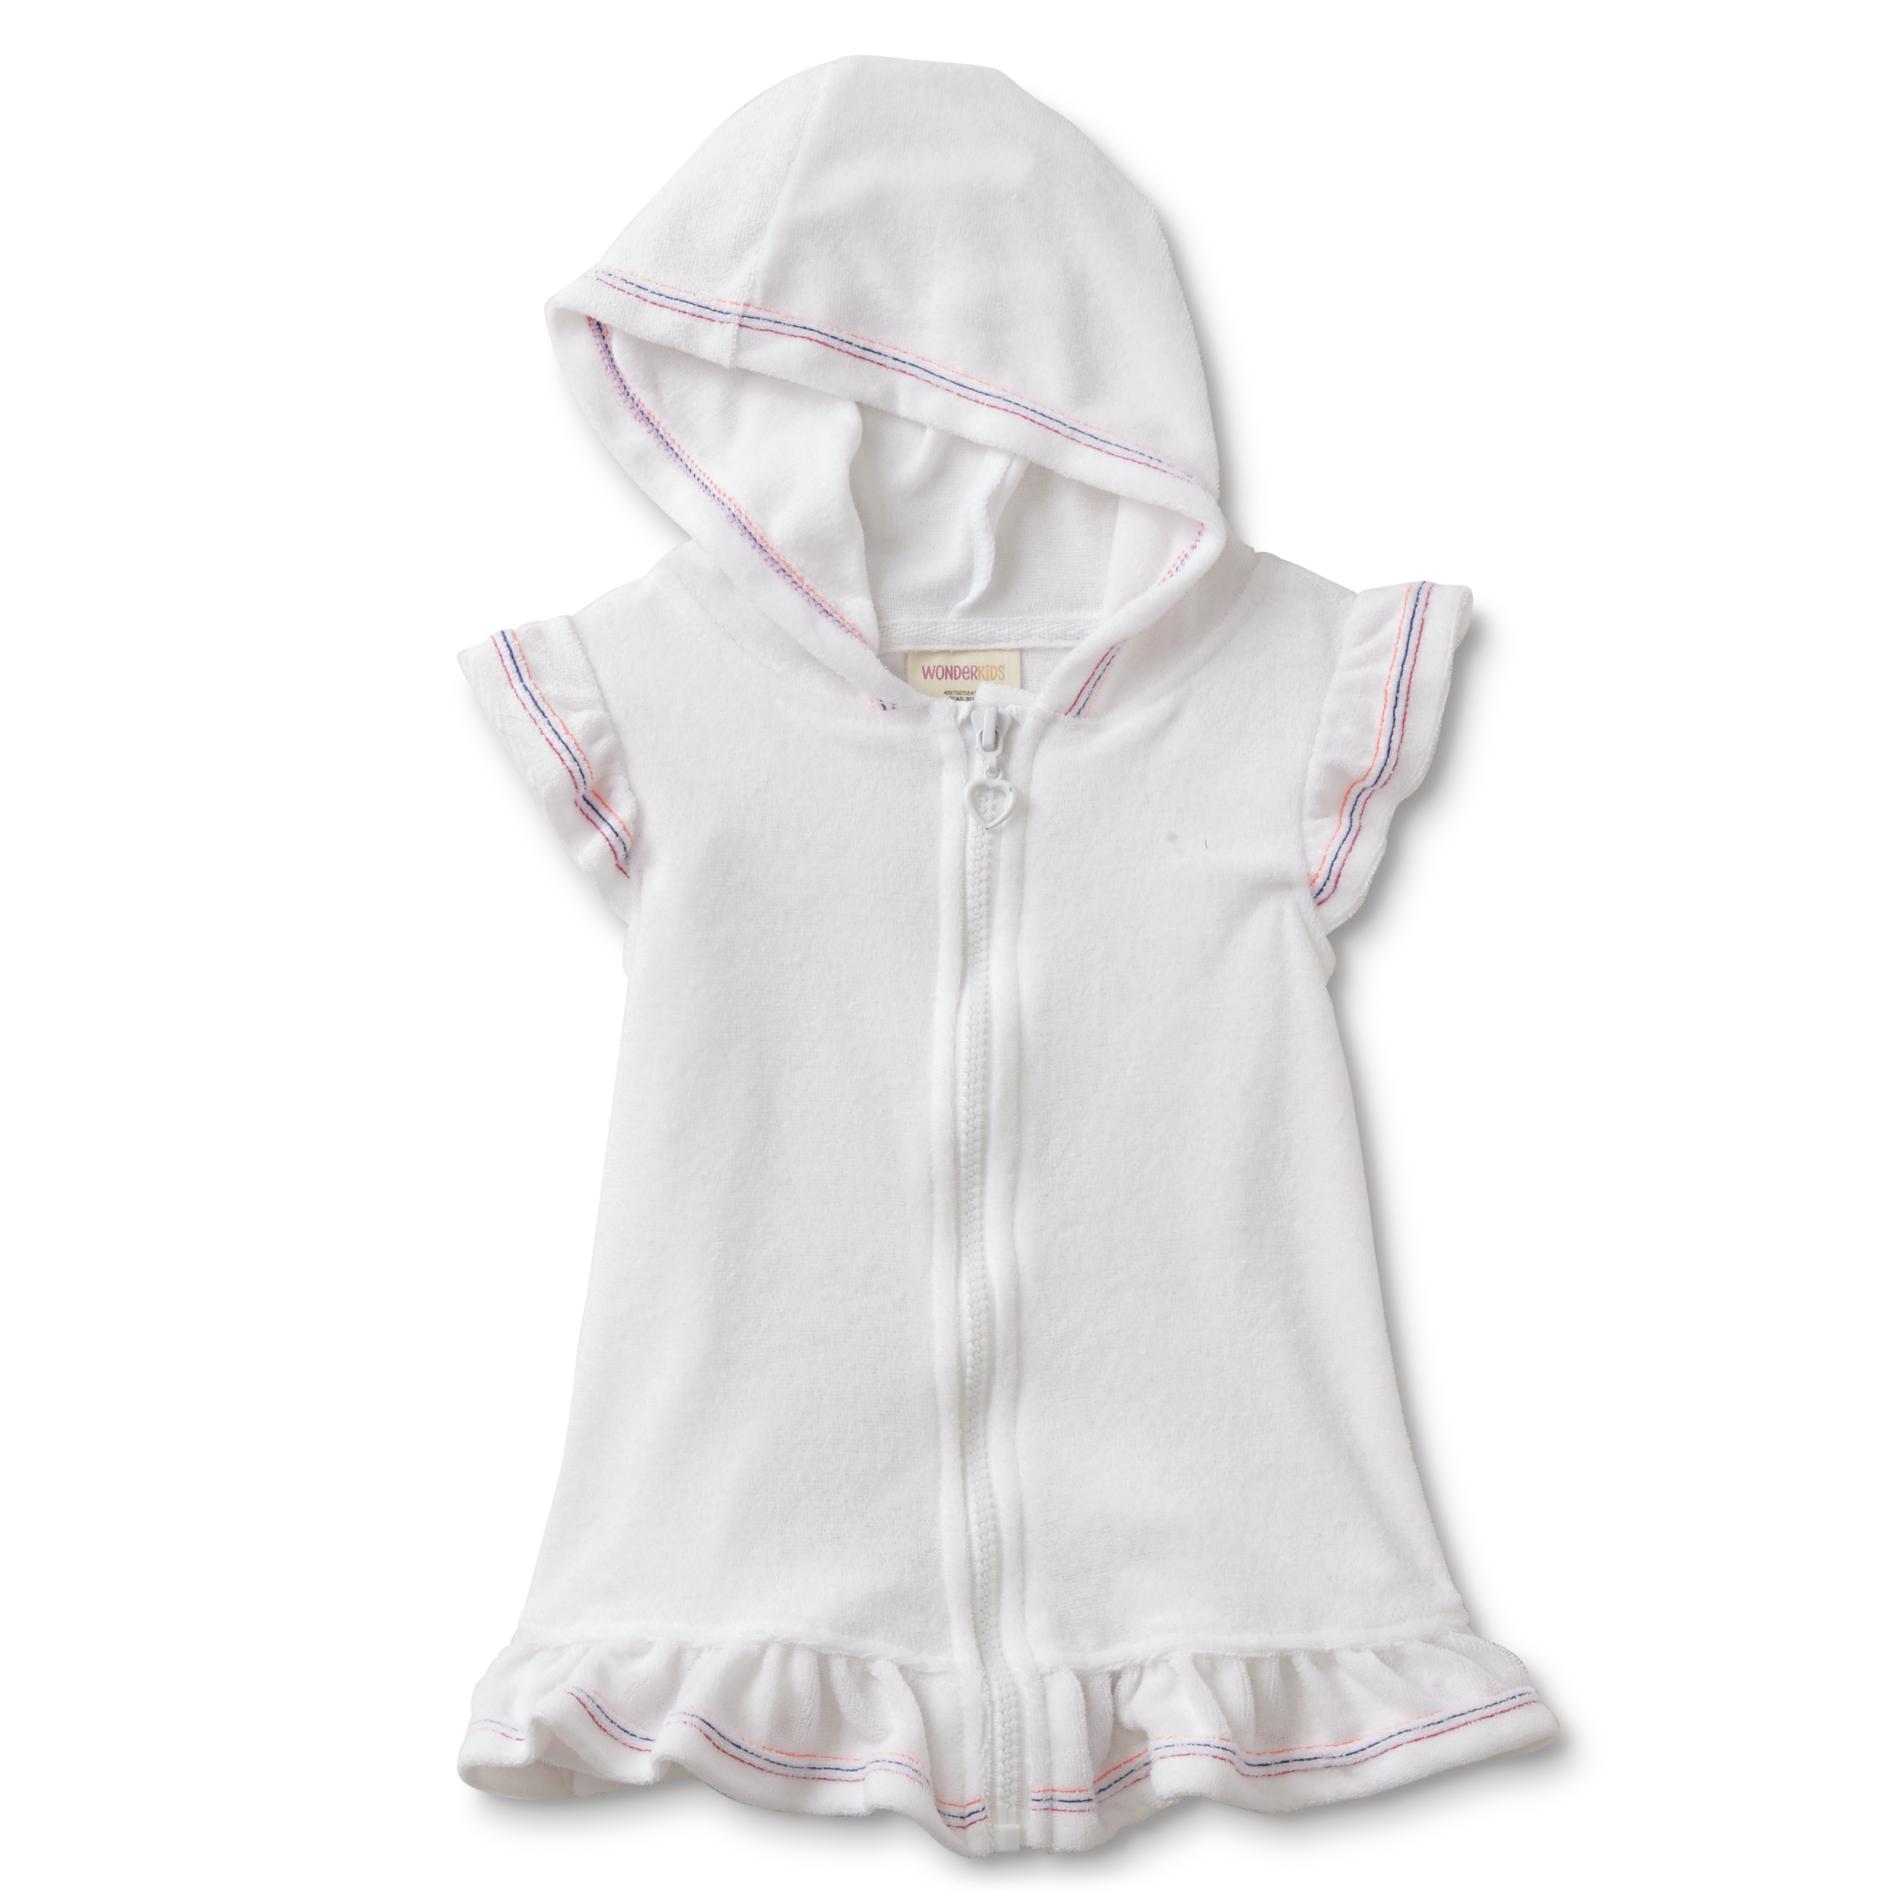 WonderKids Infant & Toddler Girl's Swim Cover-Up Robe | Shop Your Way ...